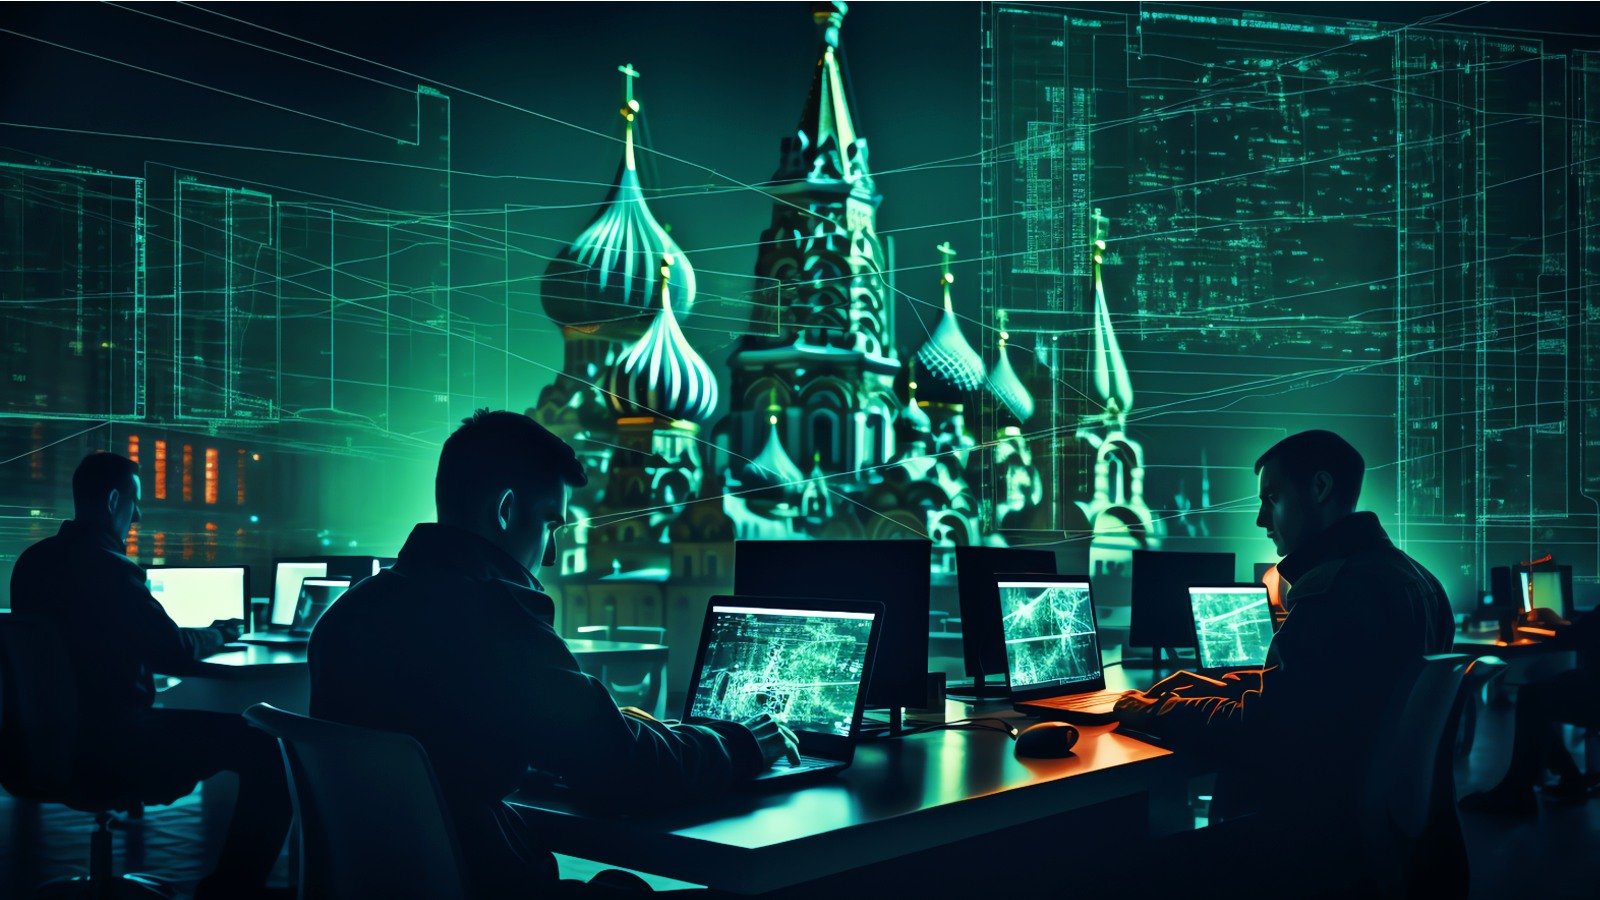 Russian military hackers target NATO fast reaction corps